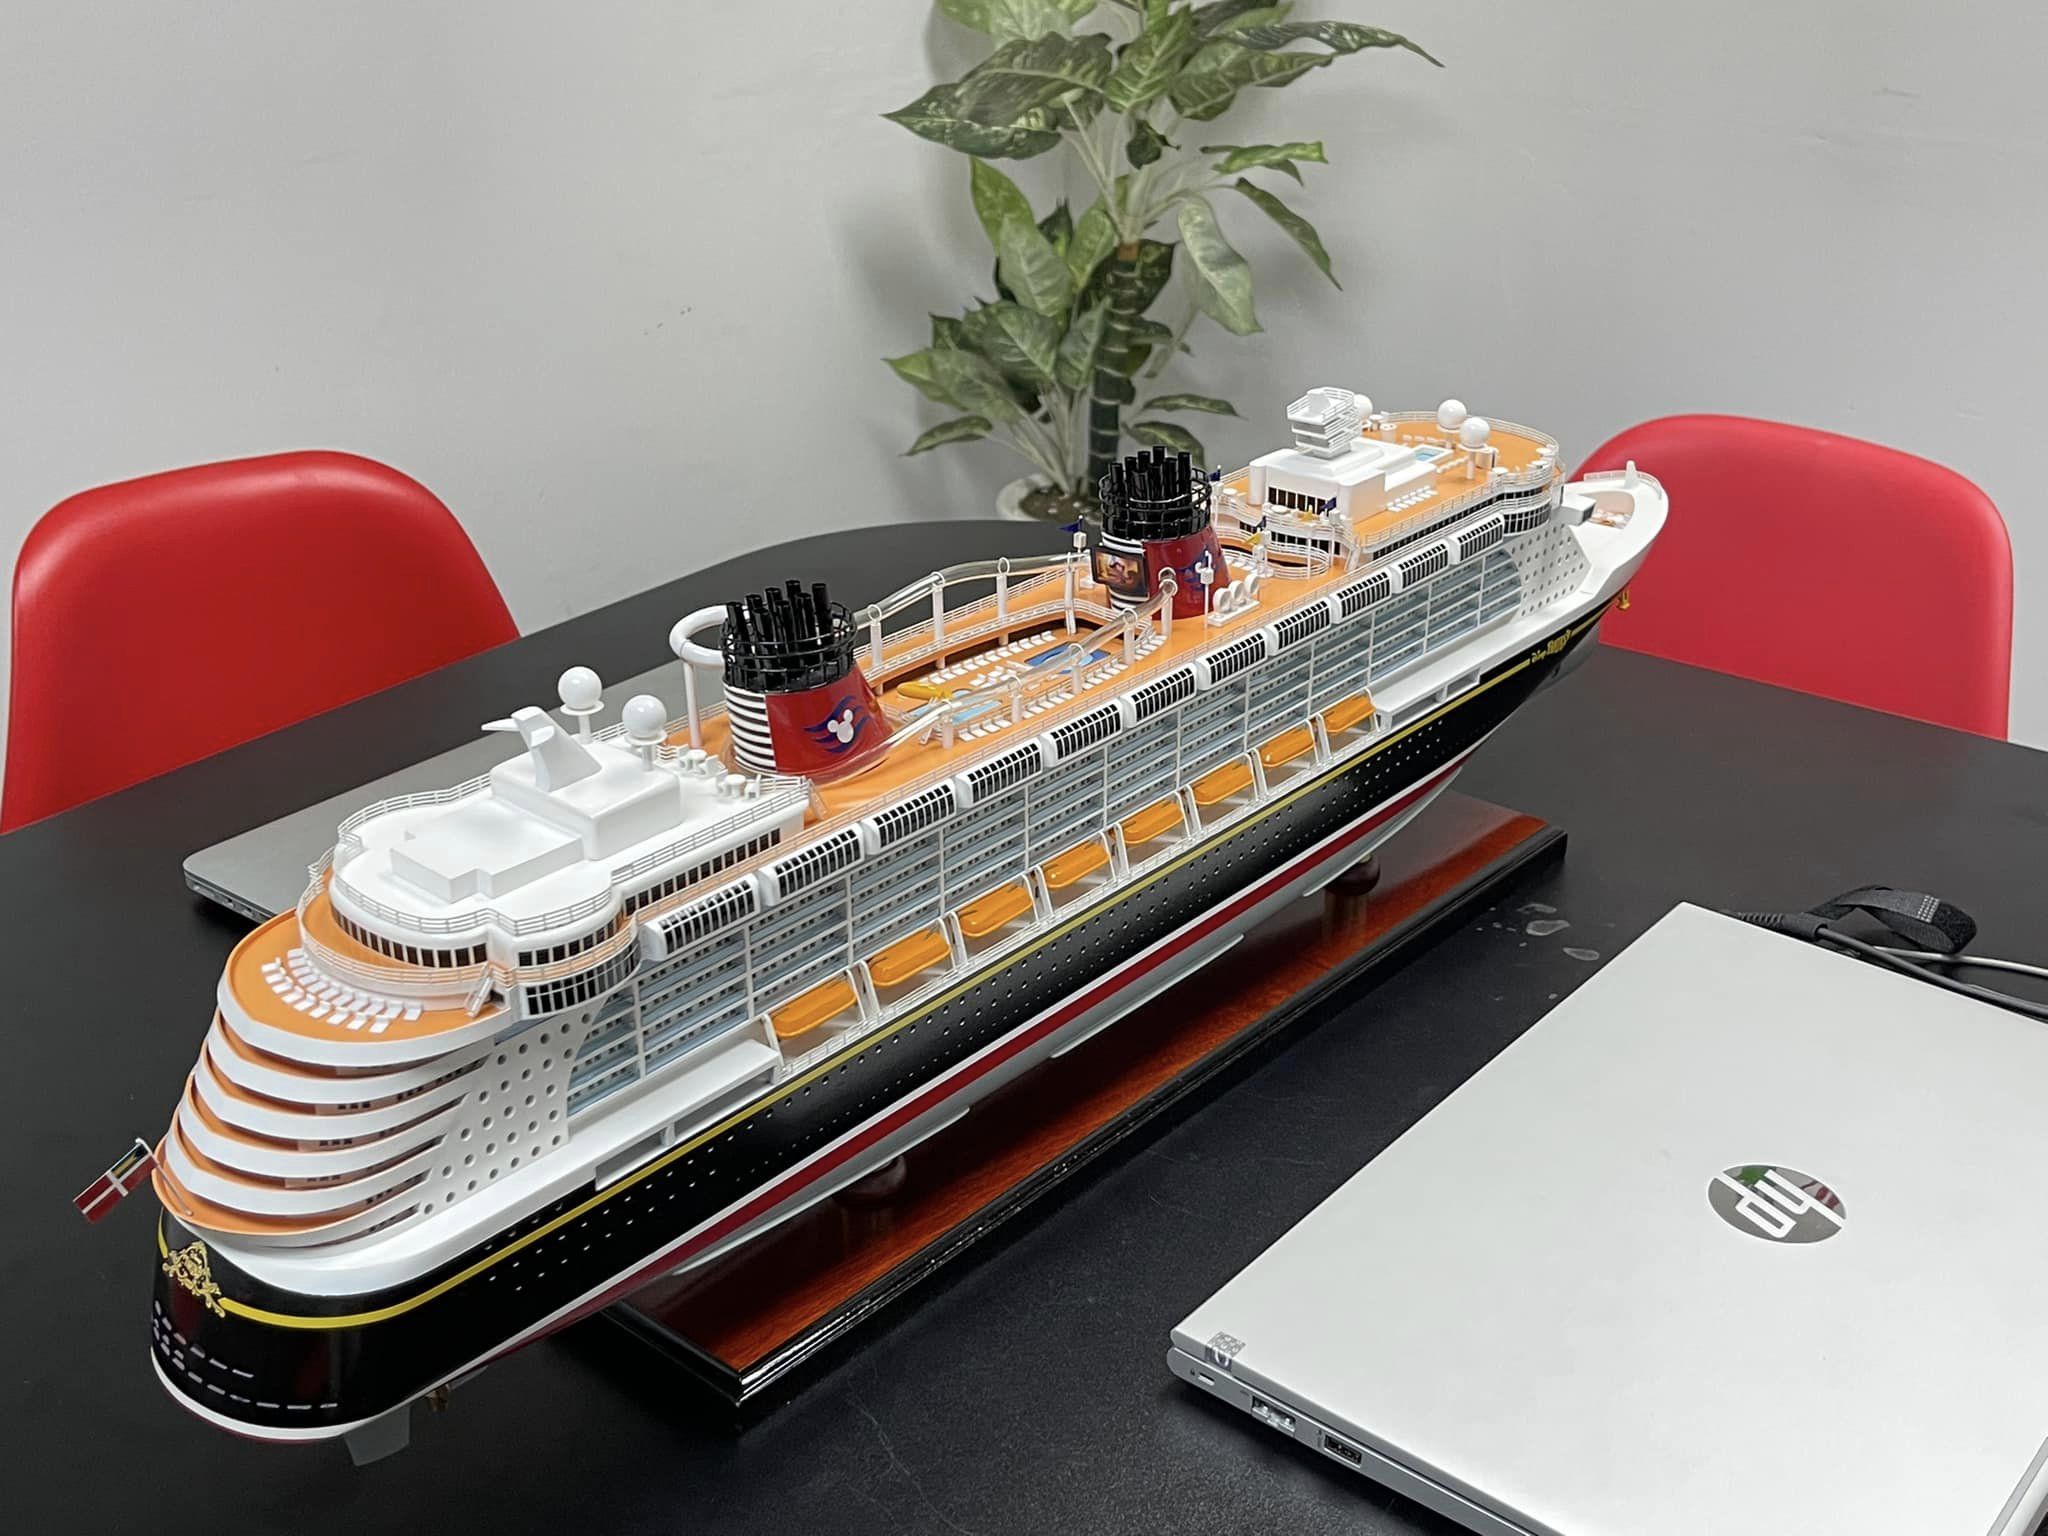 Sailing Model Decoration Trends In The Next 10 Years